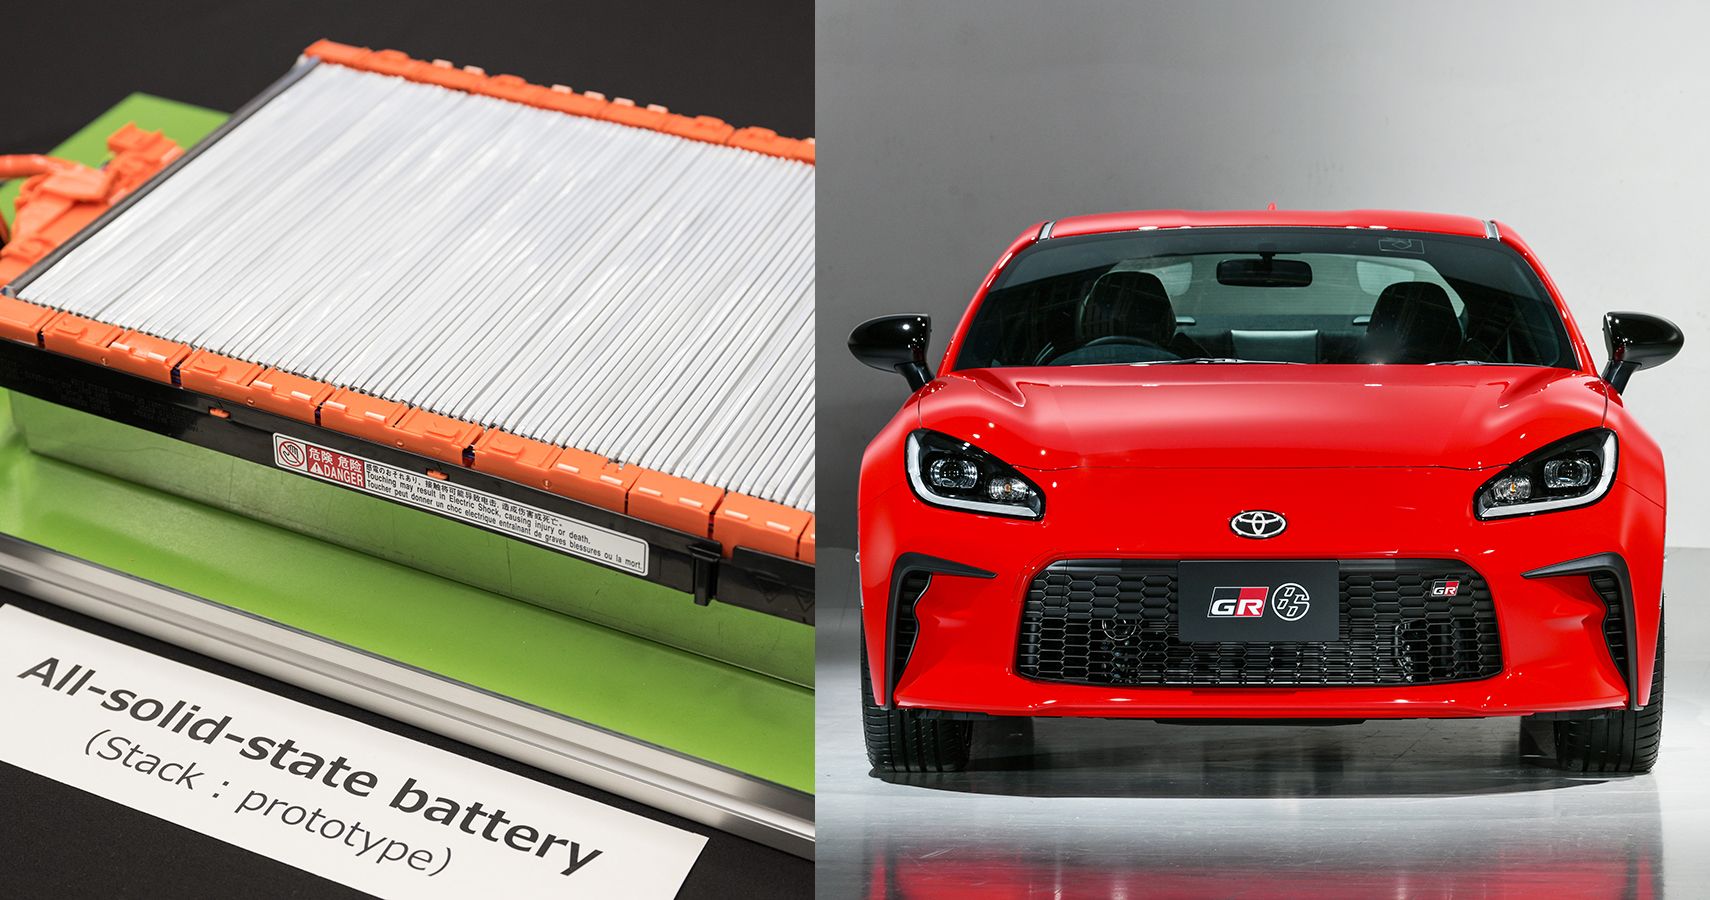 red Toyota GR 86 and solid-state battery